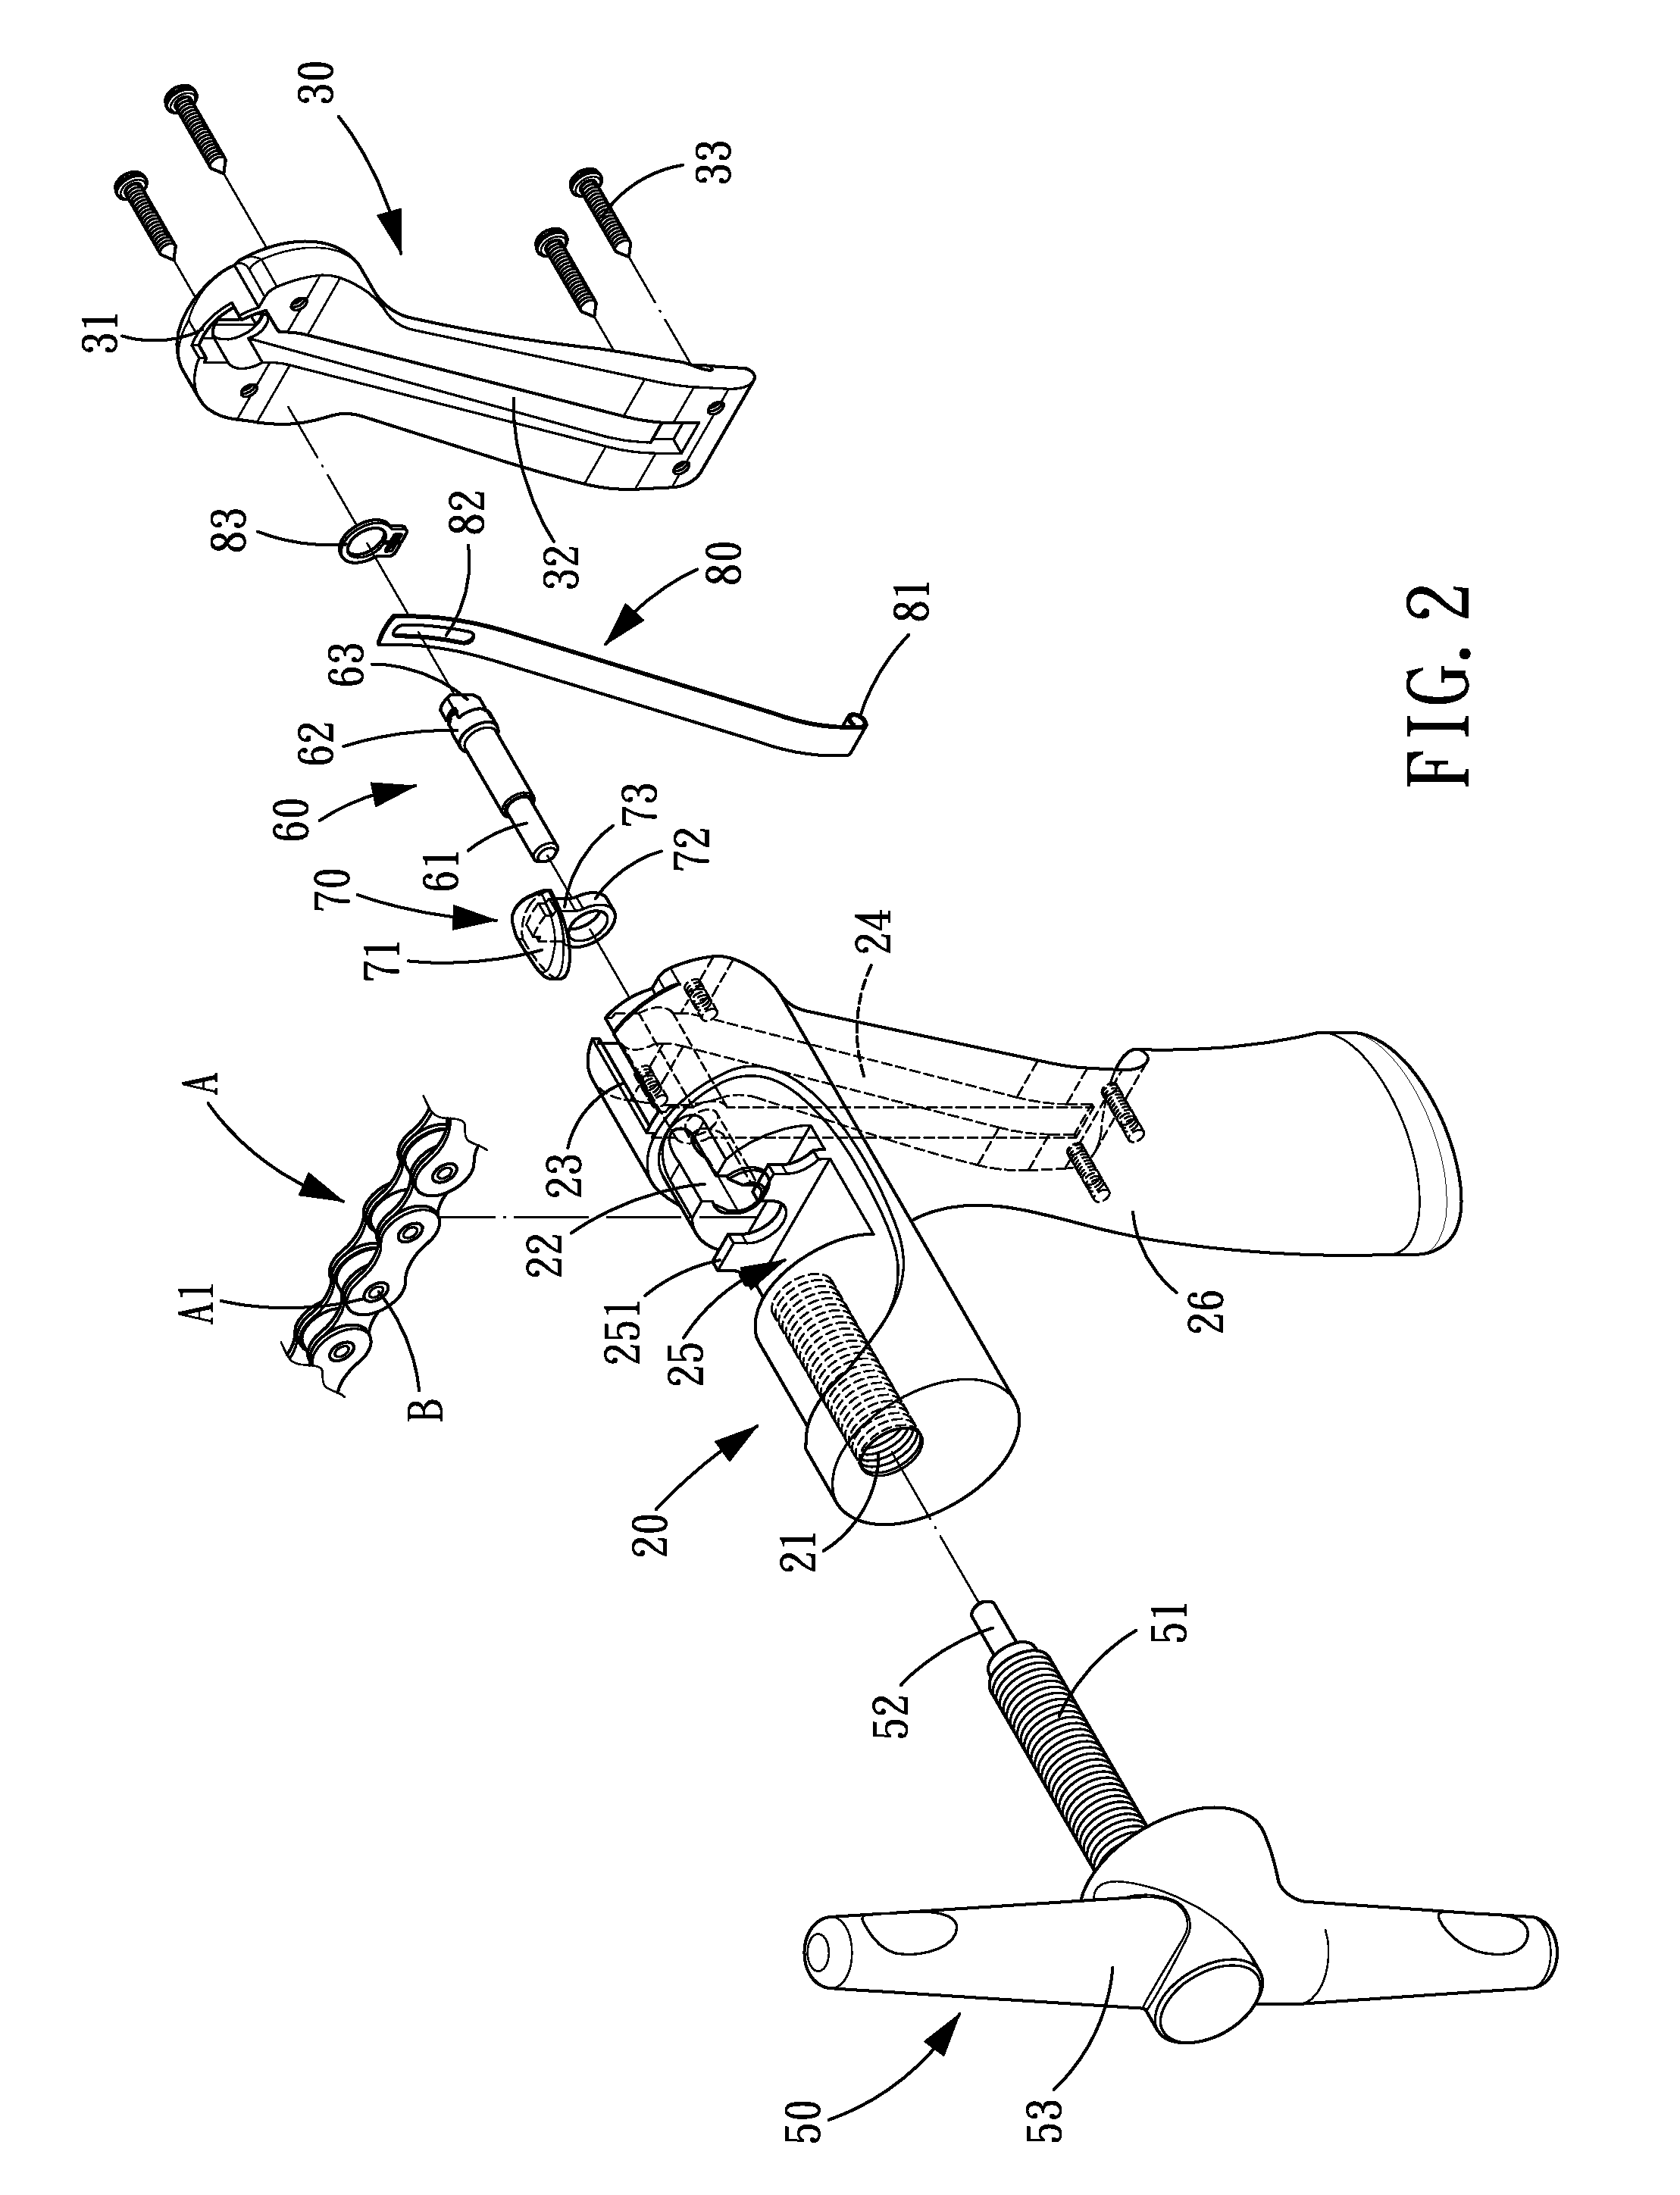 Device for assembling and disassembling a bicycle chain